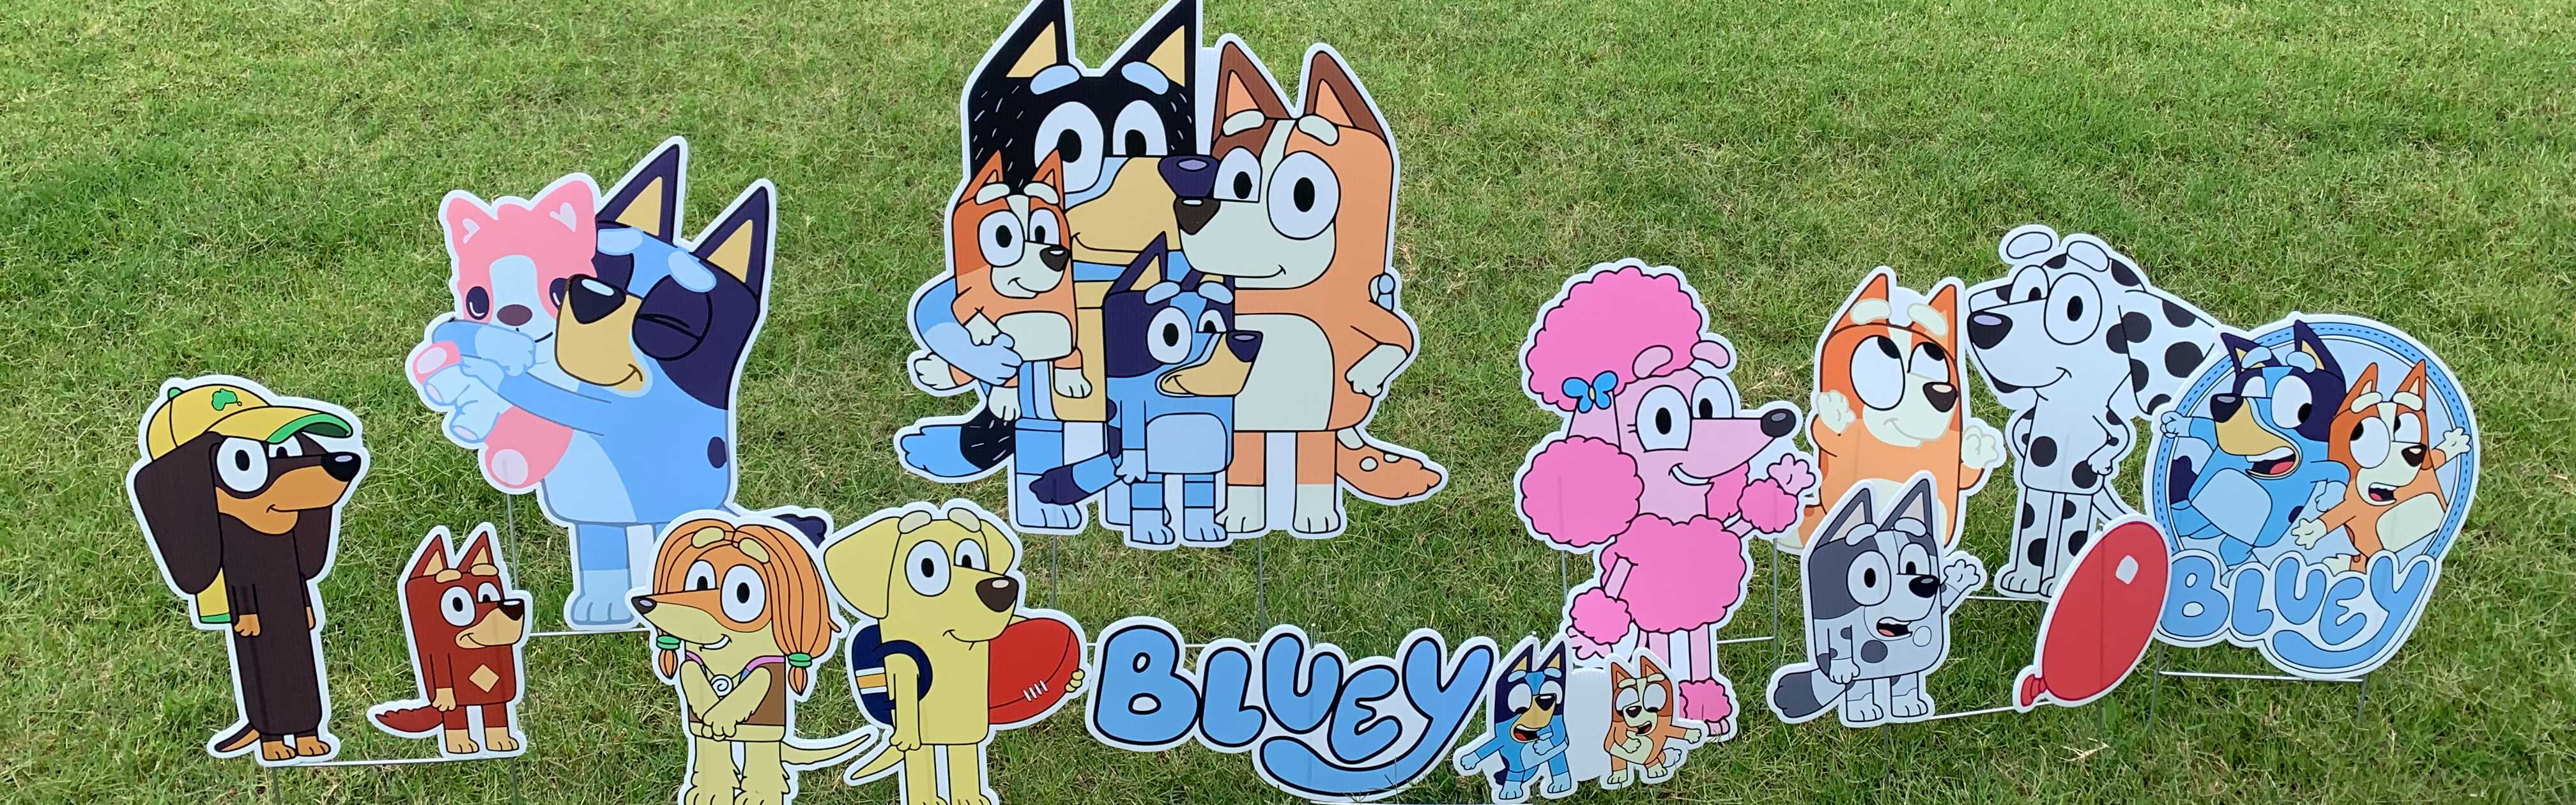 Yard card sign collection bluey 